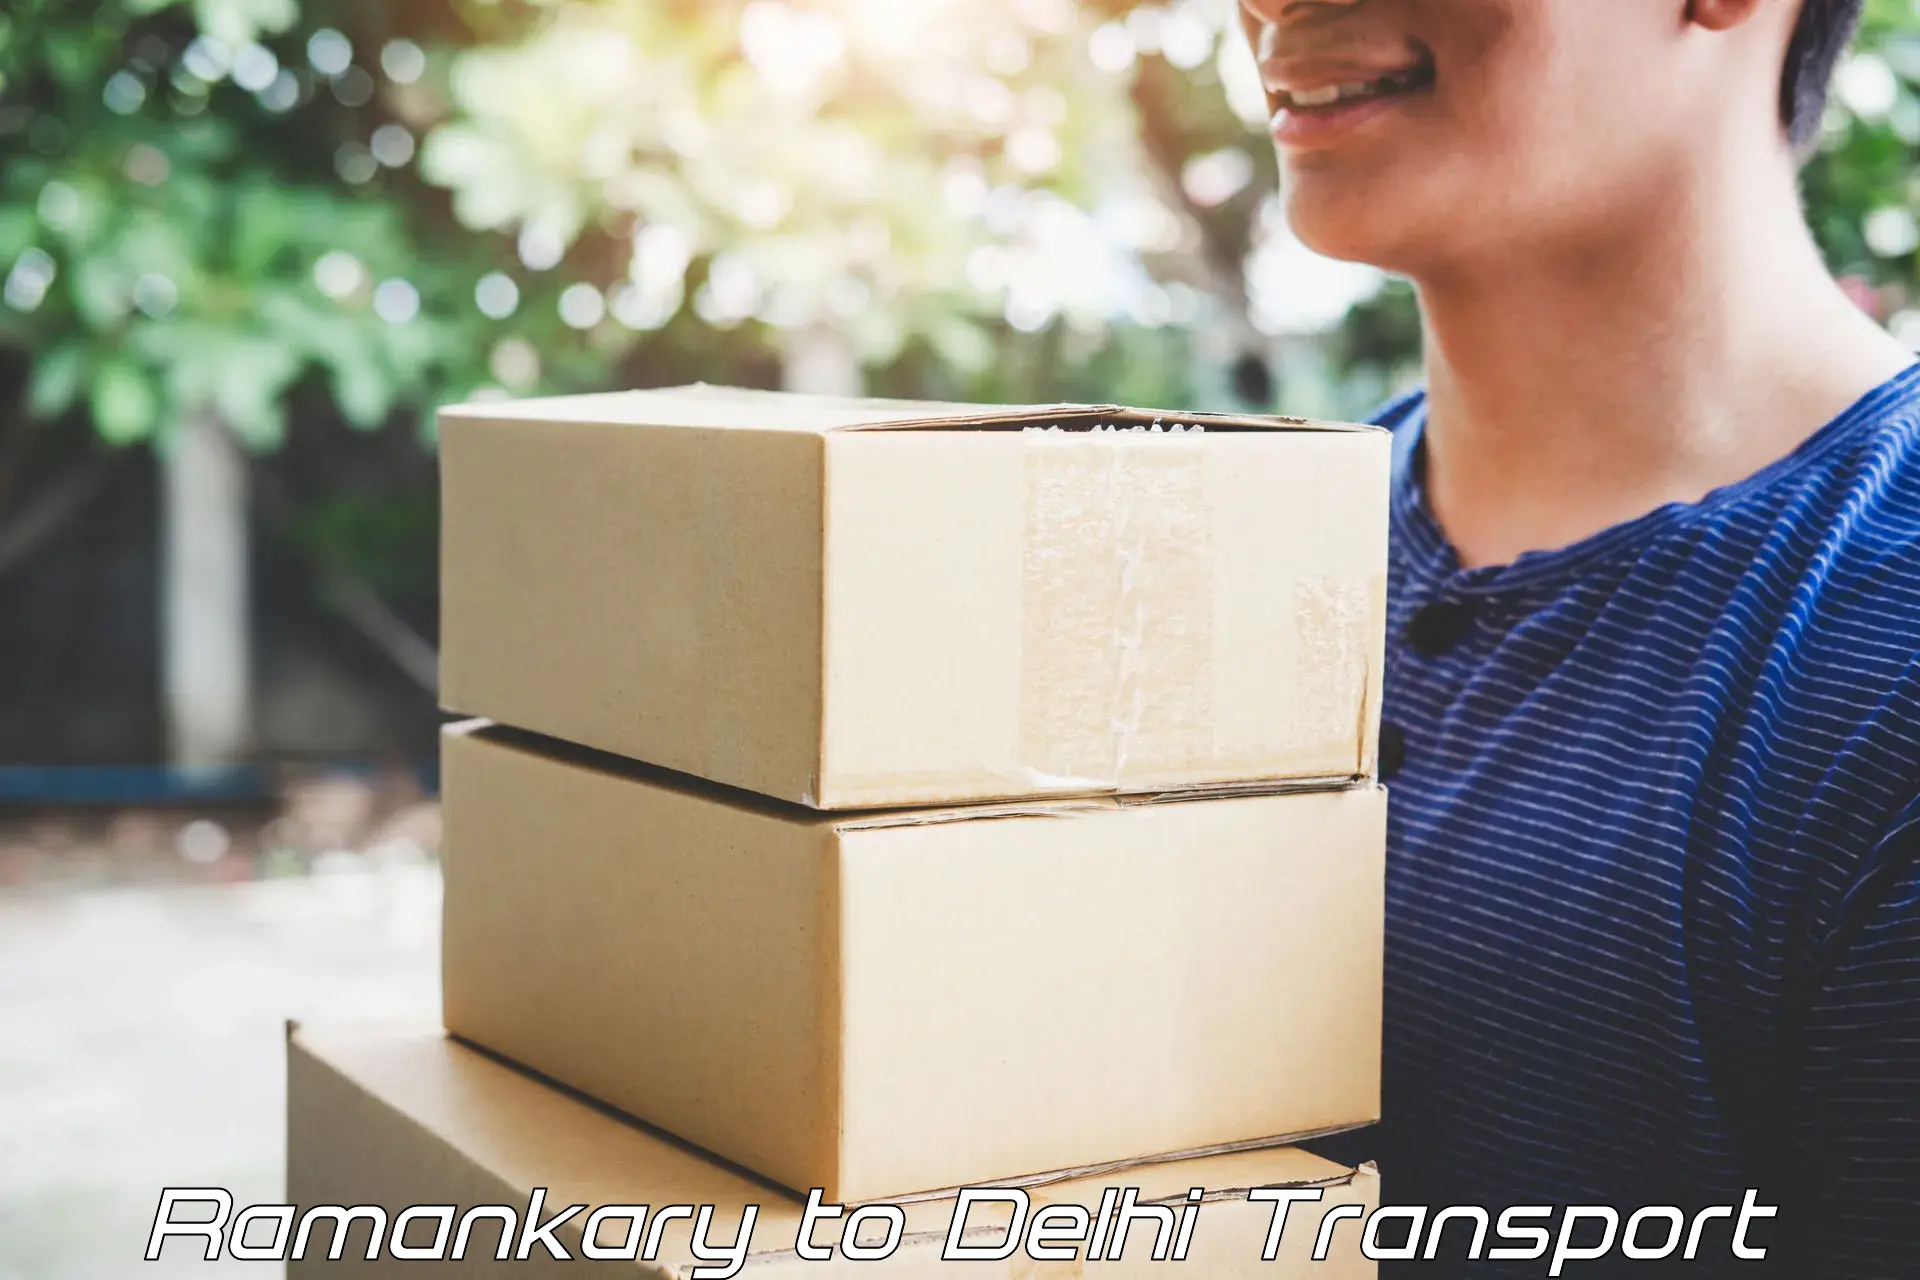 Pick up transport service in Ramankary to Delhi